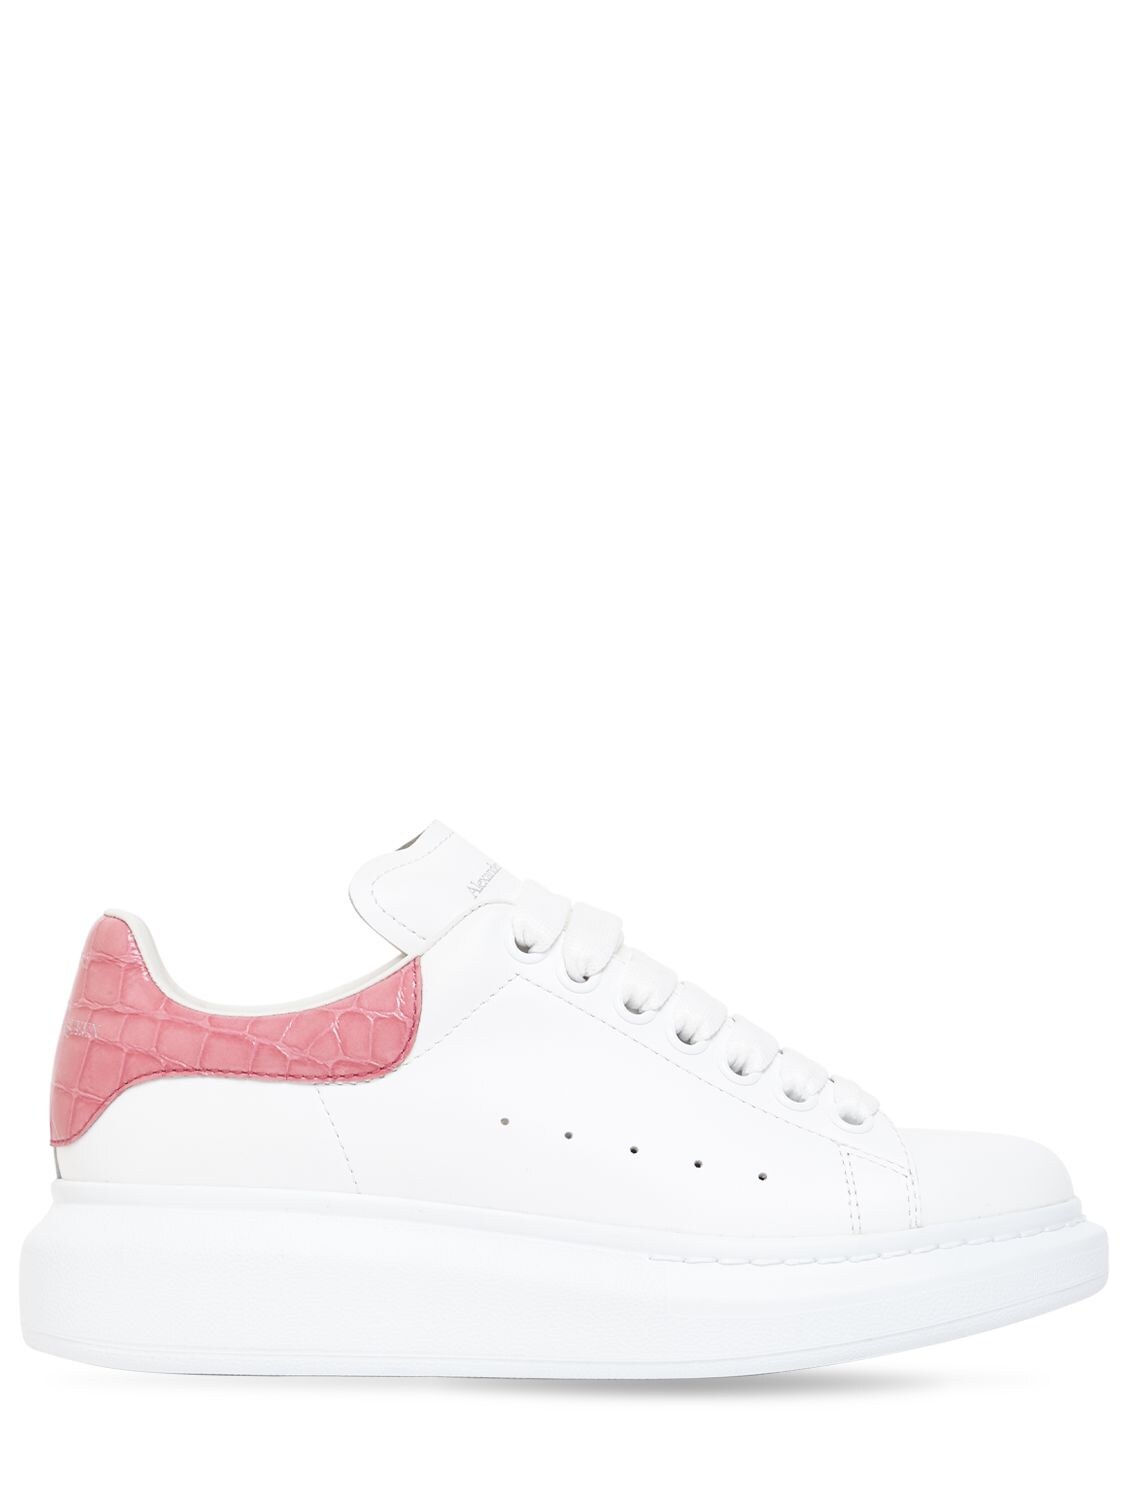 Alexander Mcqueen 40mm Leather & Croco Embossed Sneakers In White,pink